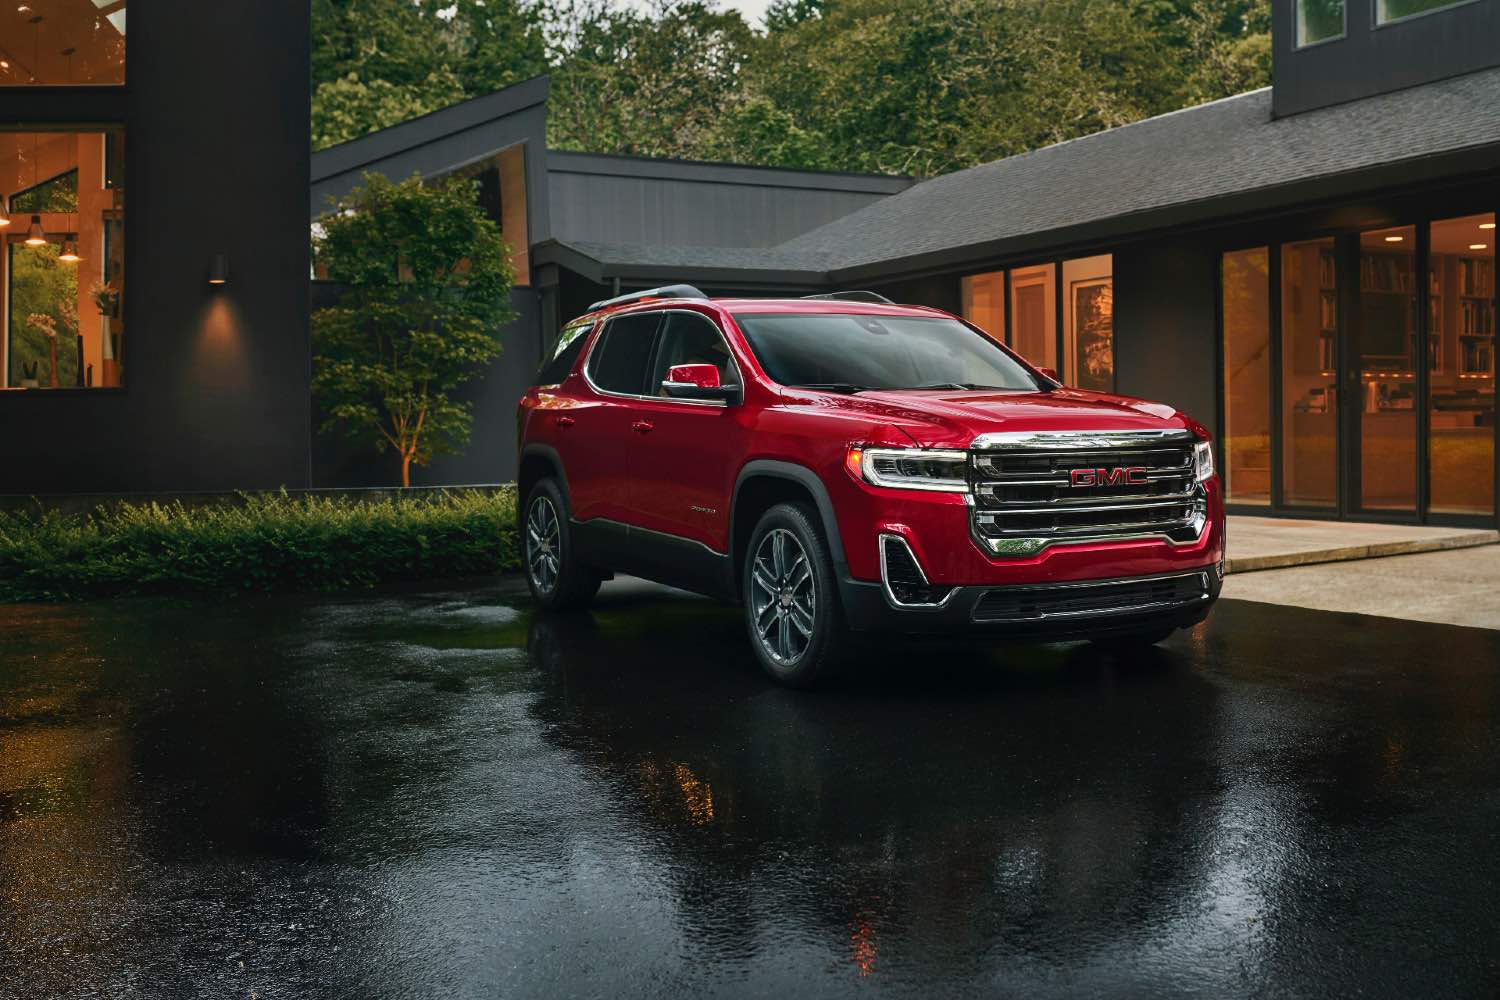 2023 GMC Acadia in red